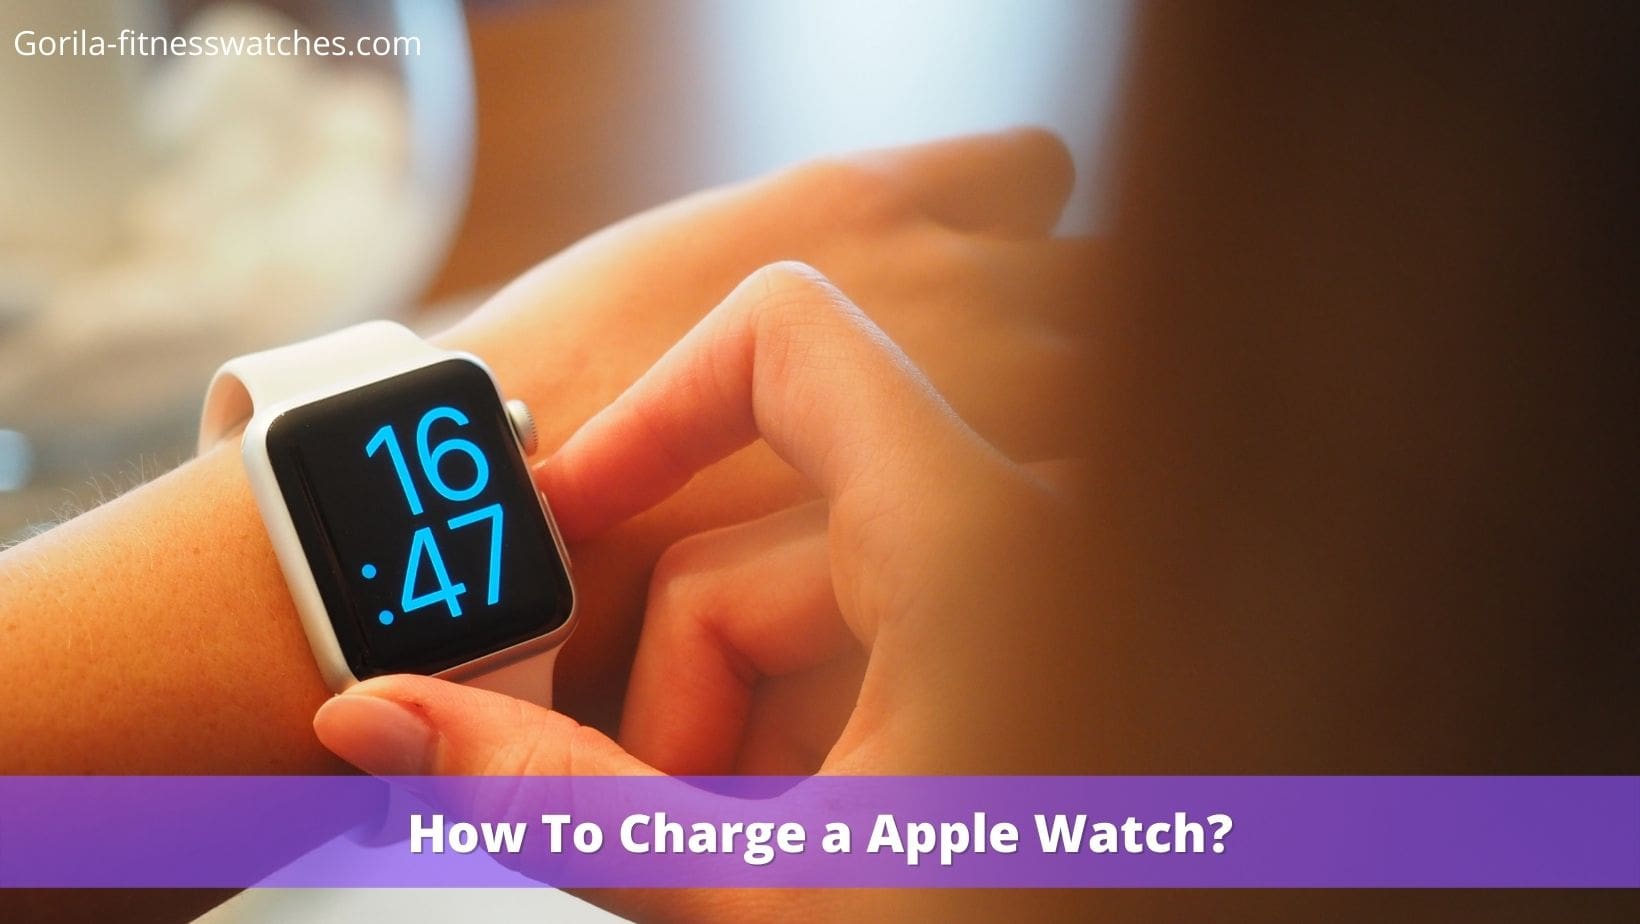 How To Charge a Apple Watch?